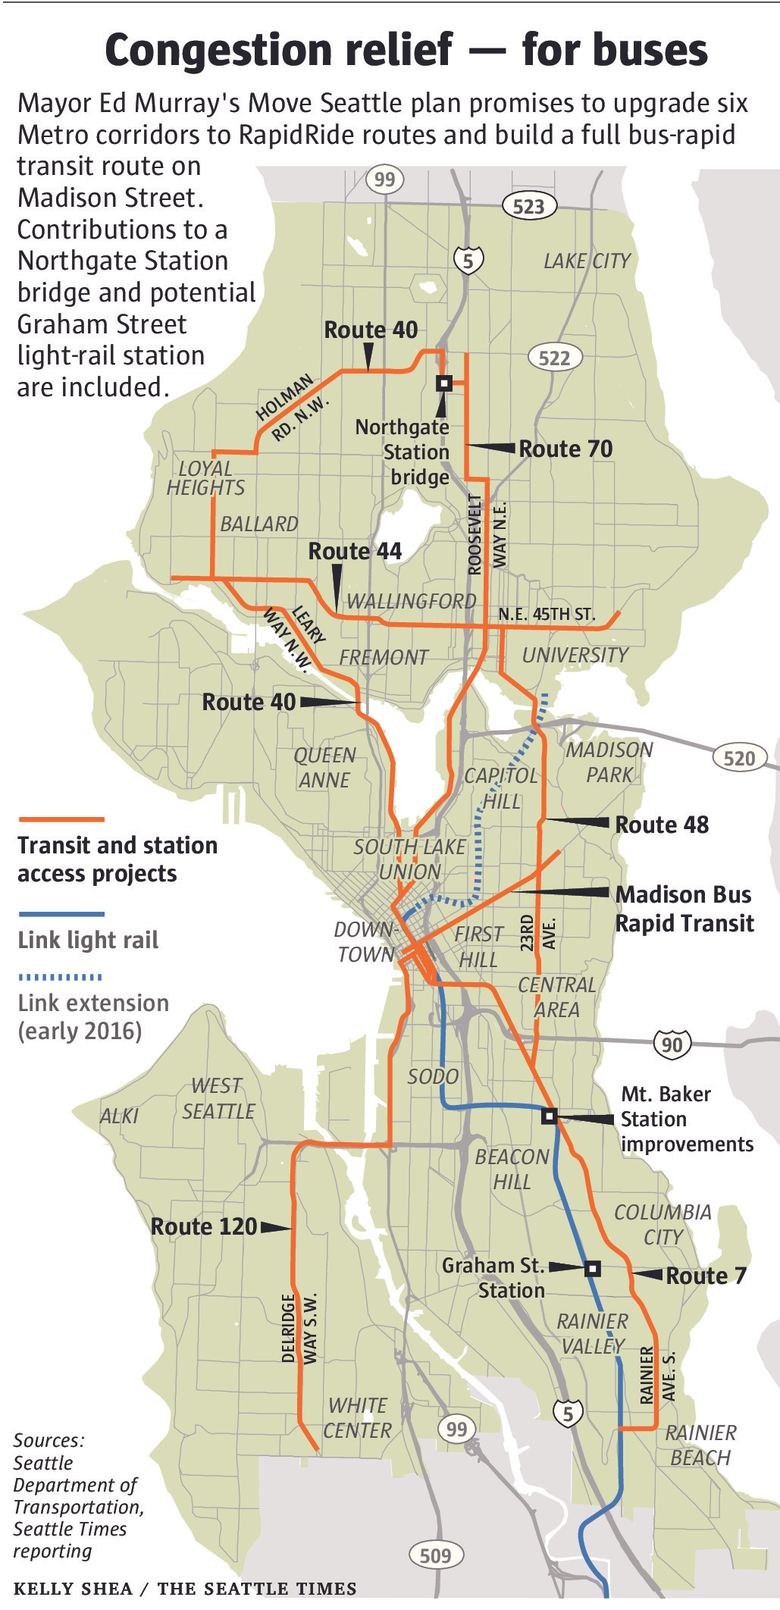 move seattle levy: better bus service or a bunch of 'guesstimates